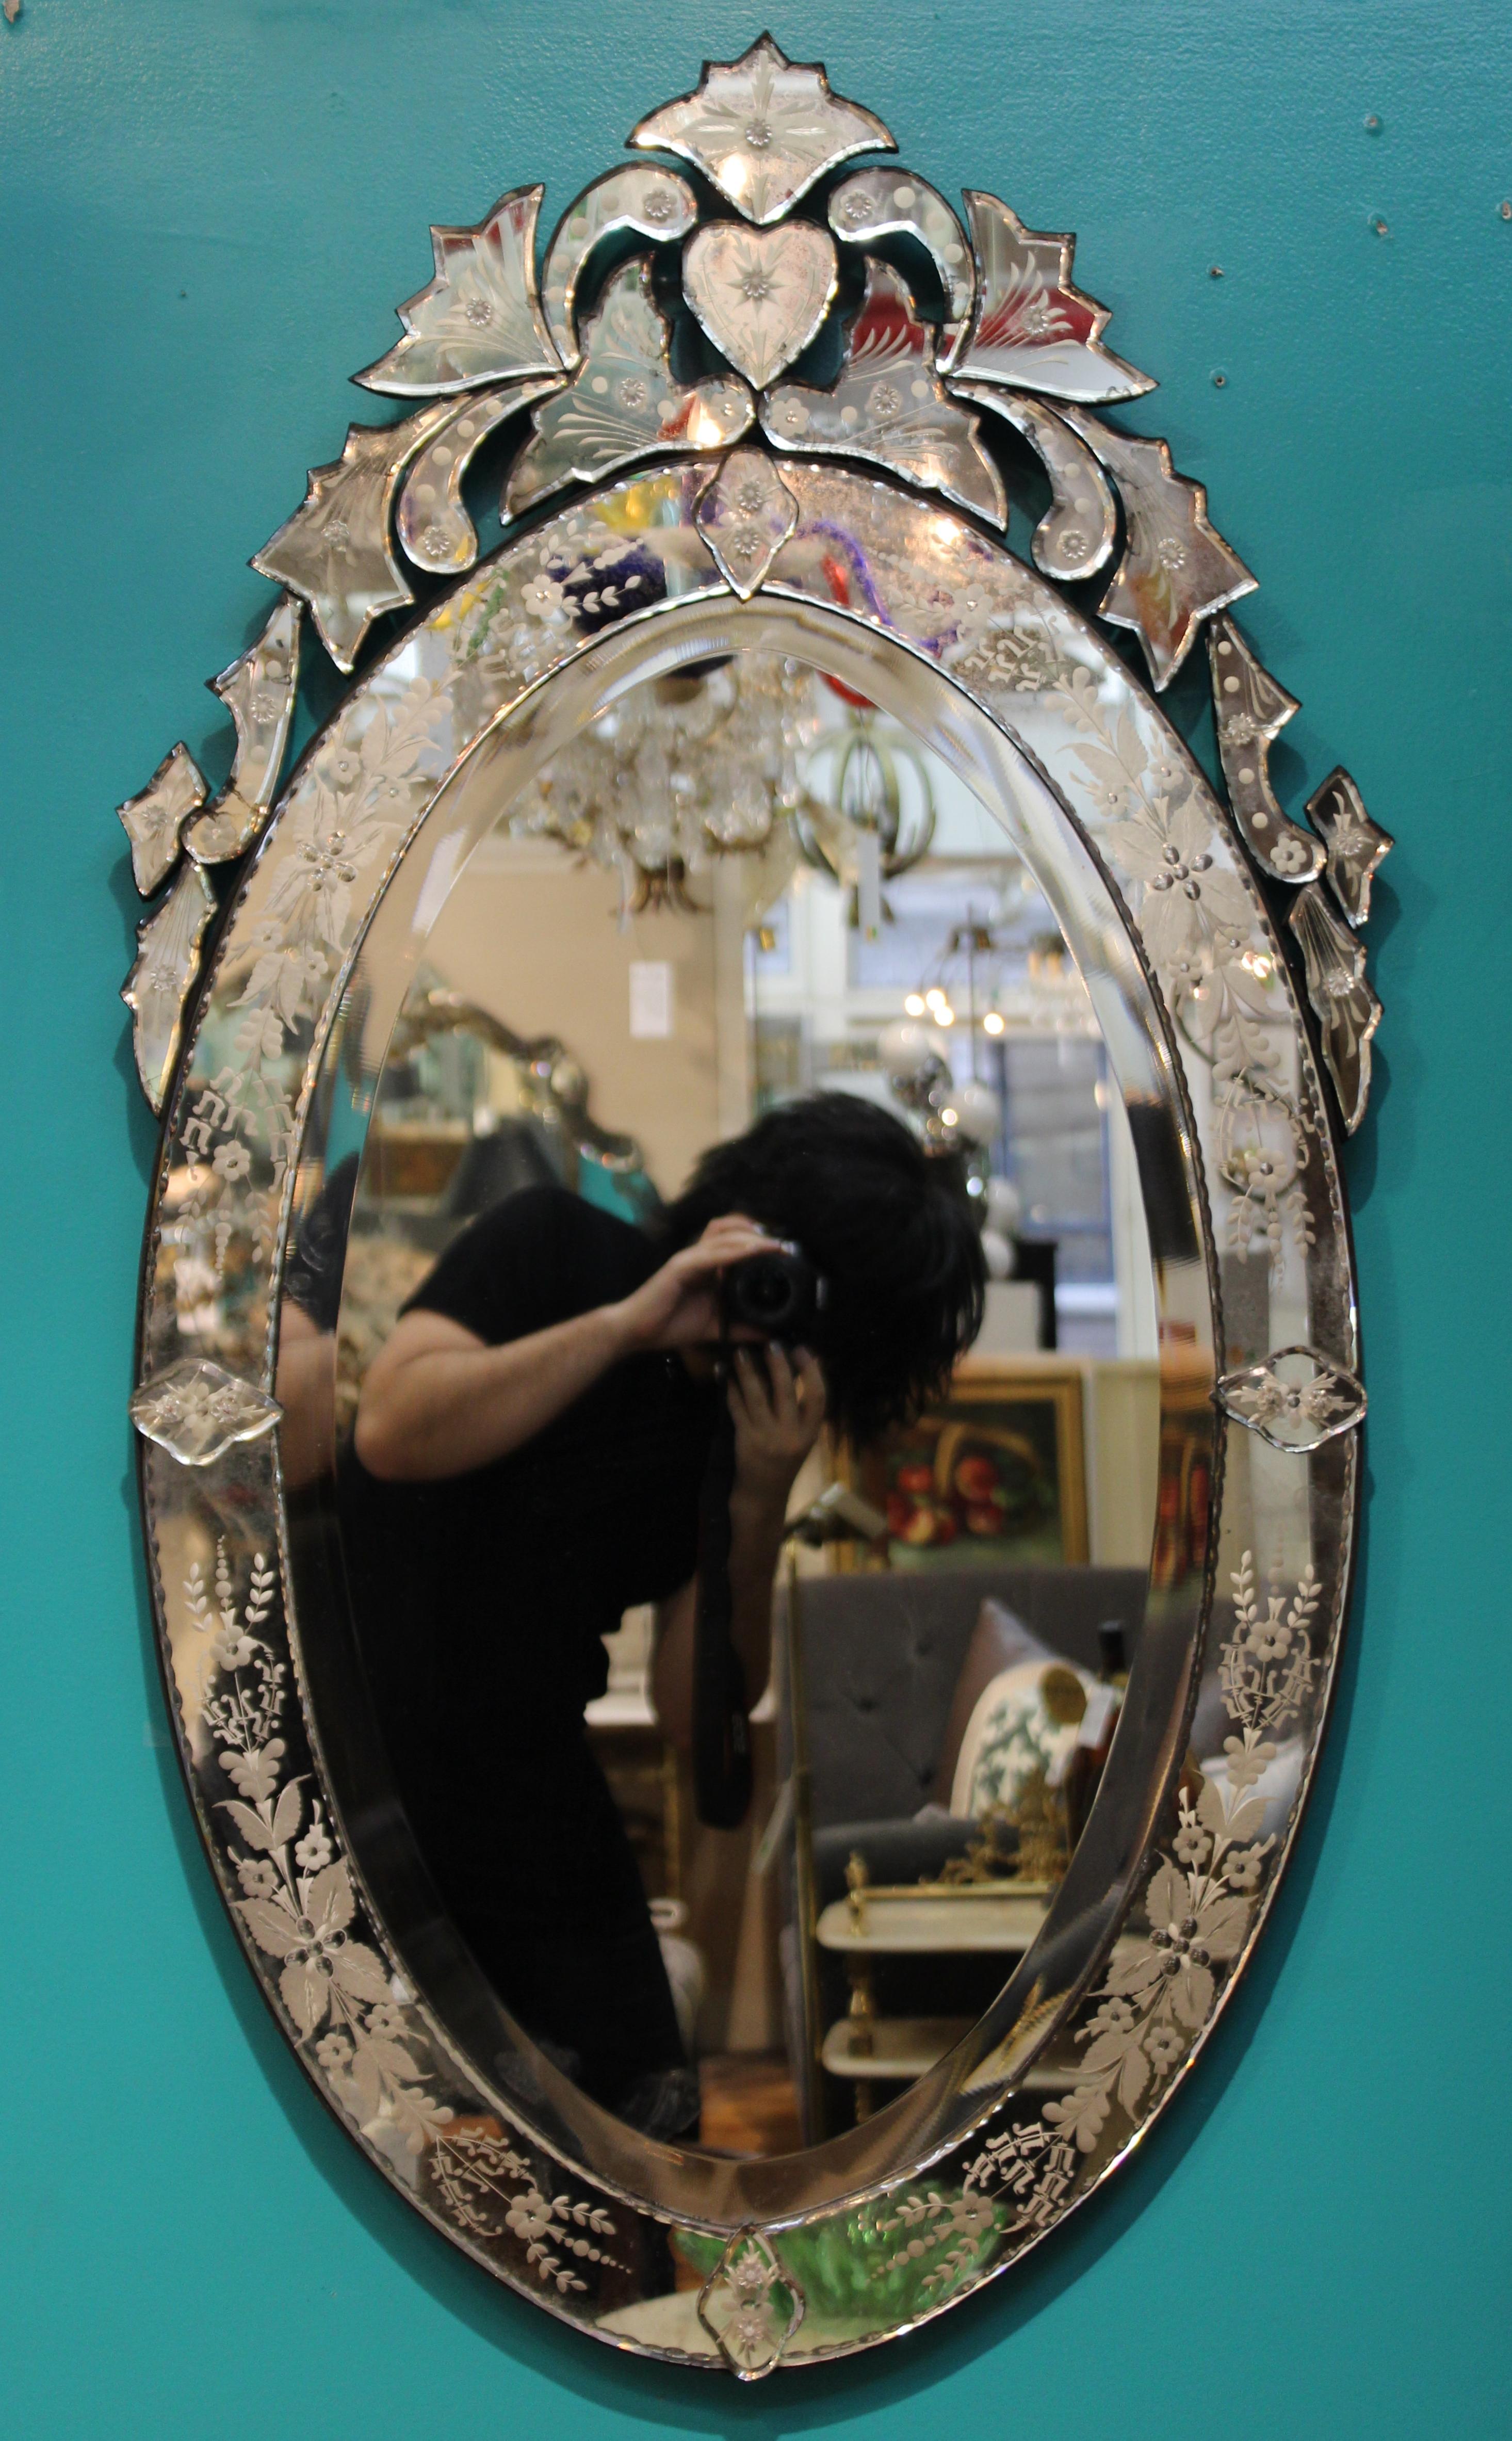 Hollywood Regency Venetian mirror in oval shape with decorative floral and foliate border. The piece was made in Italy in the 1940s and is in great vintage condition.